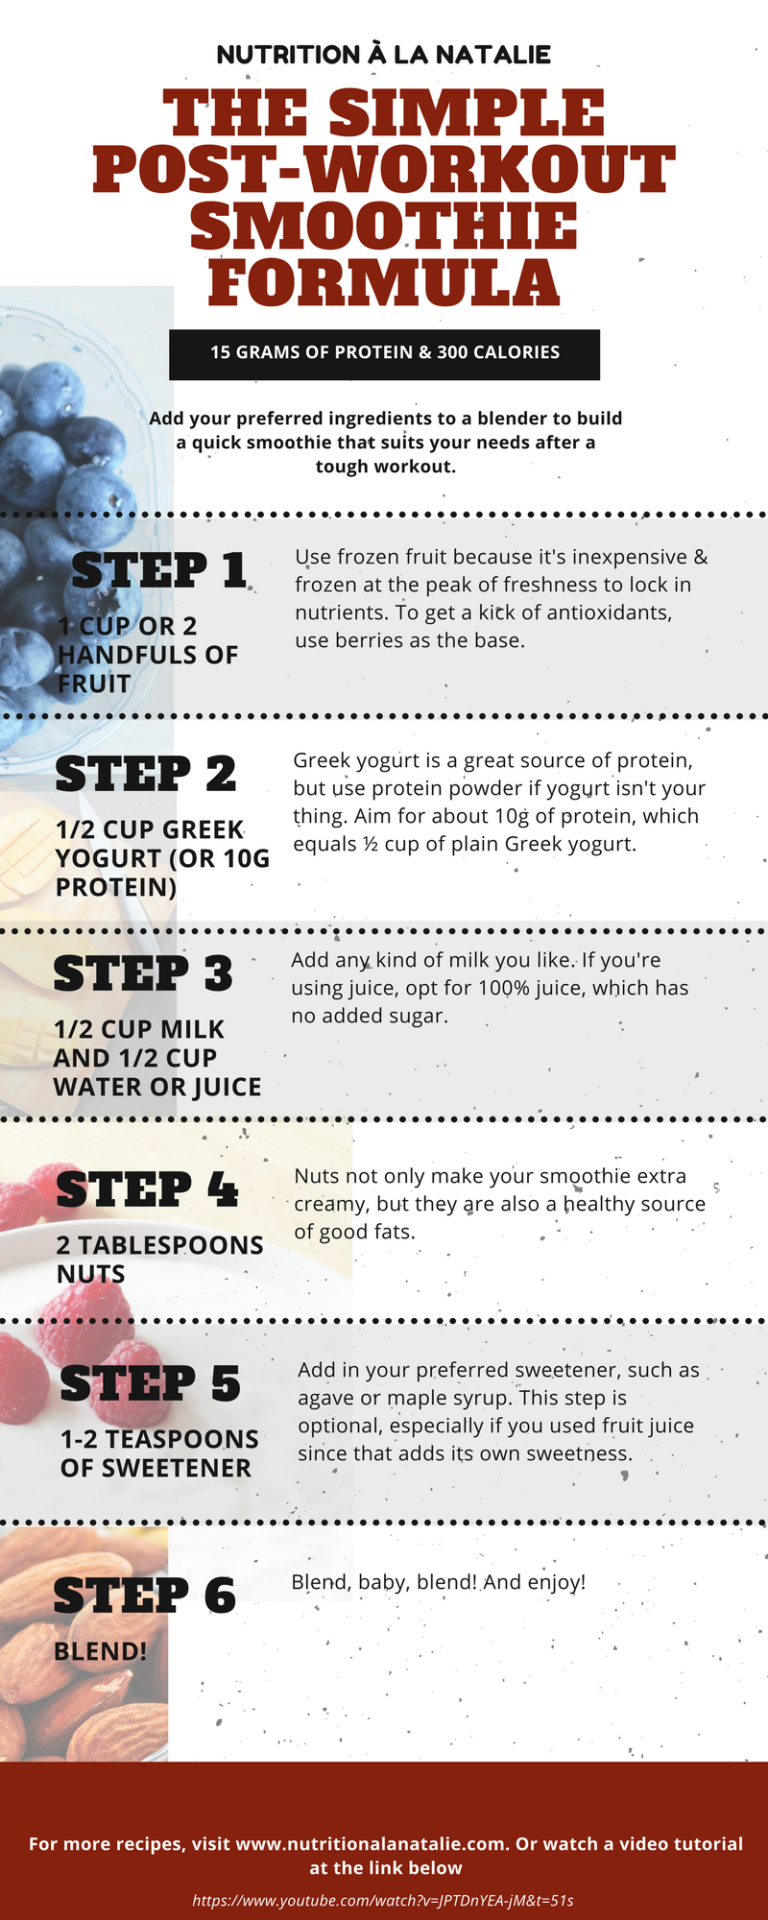 15 fitness Food poster ideas